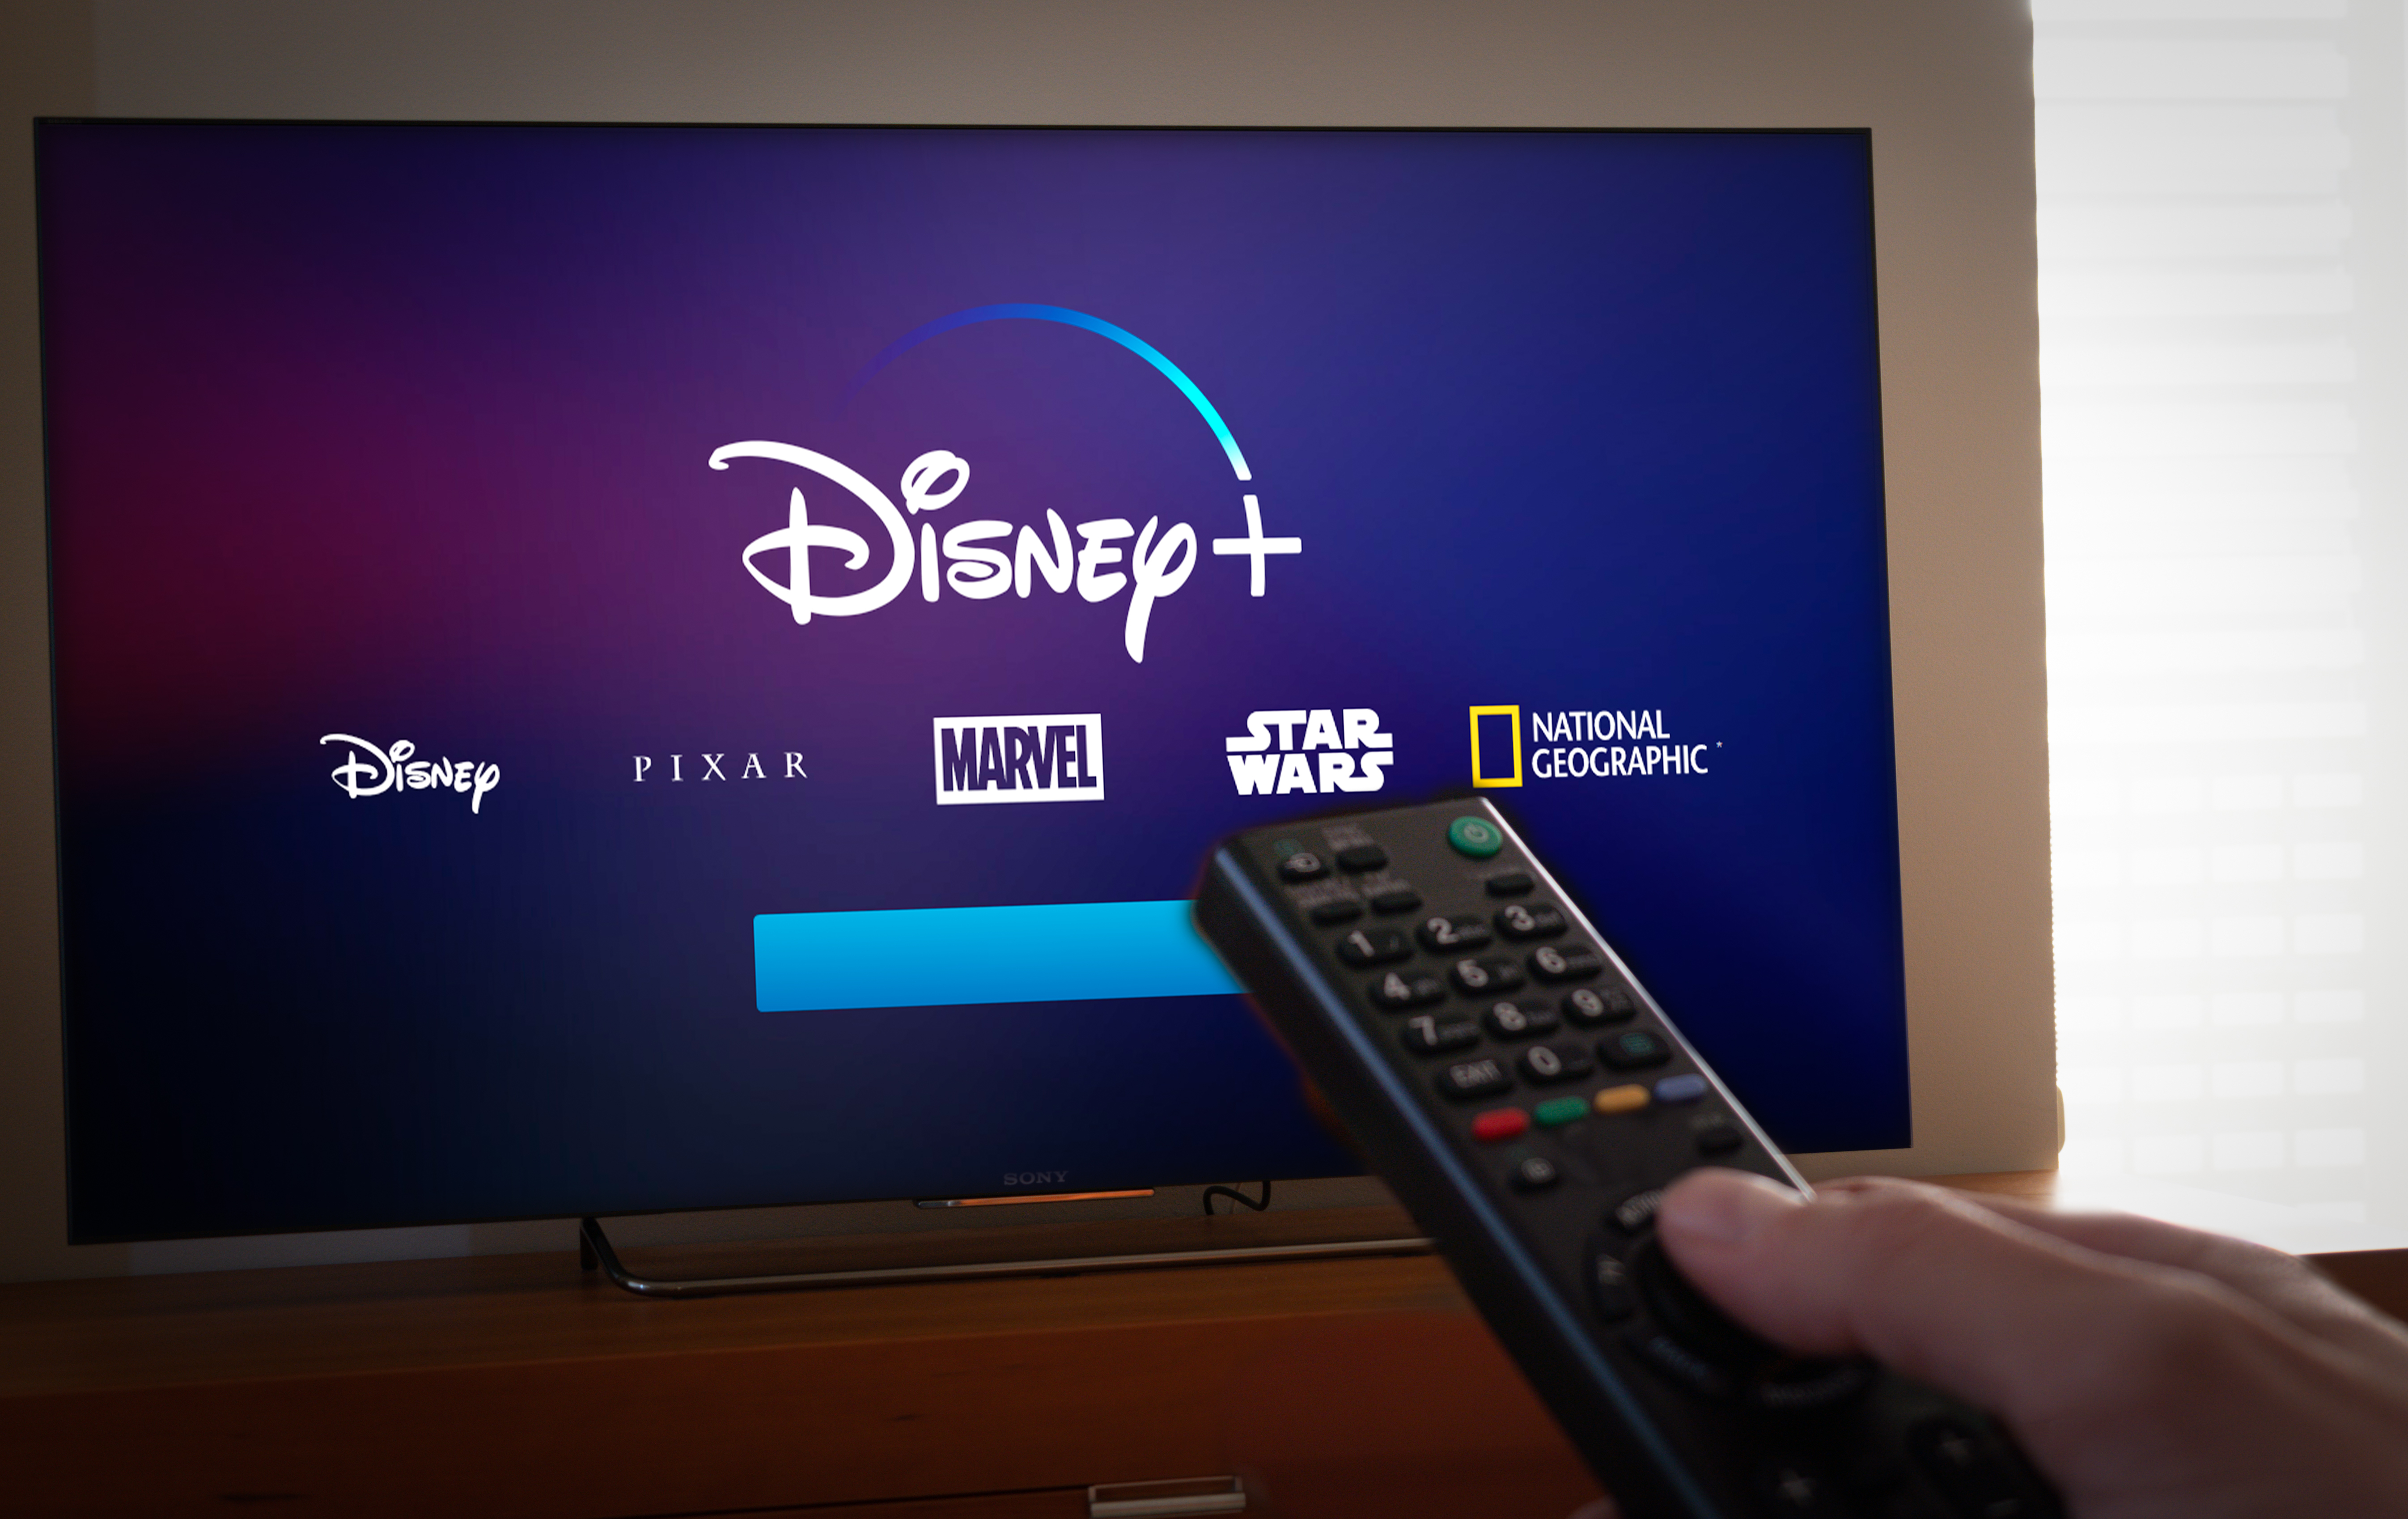 Person holding a TV remote with the Disney+ logo on it